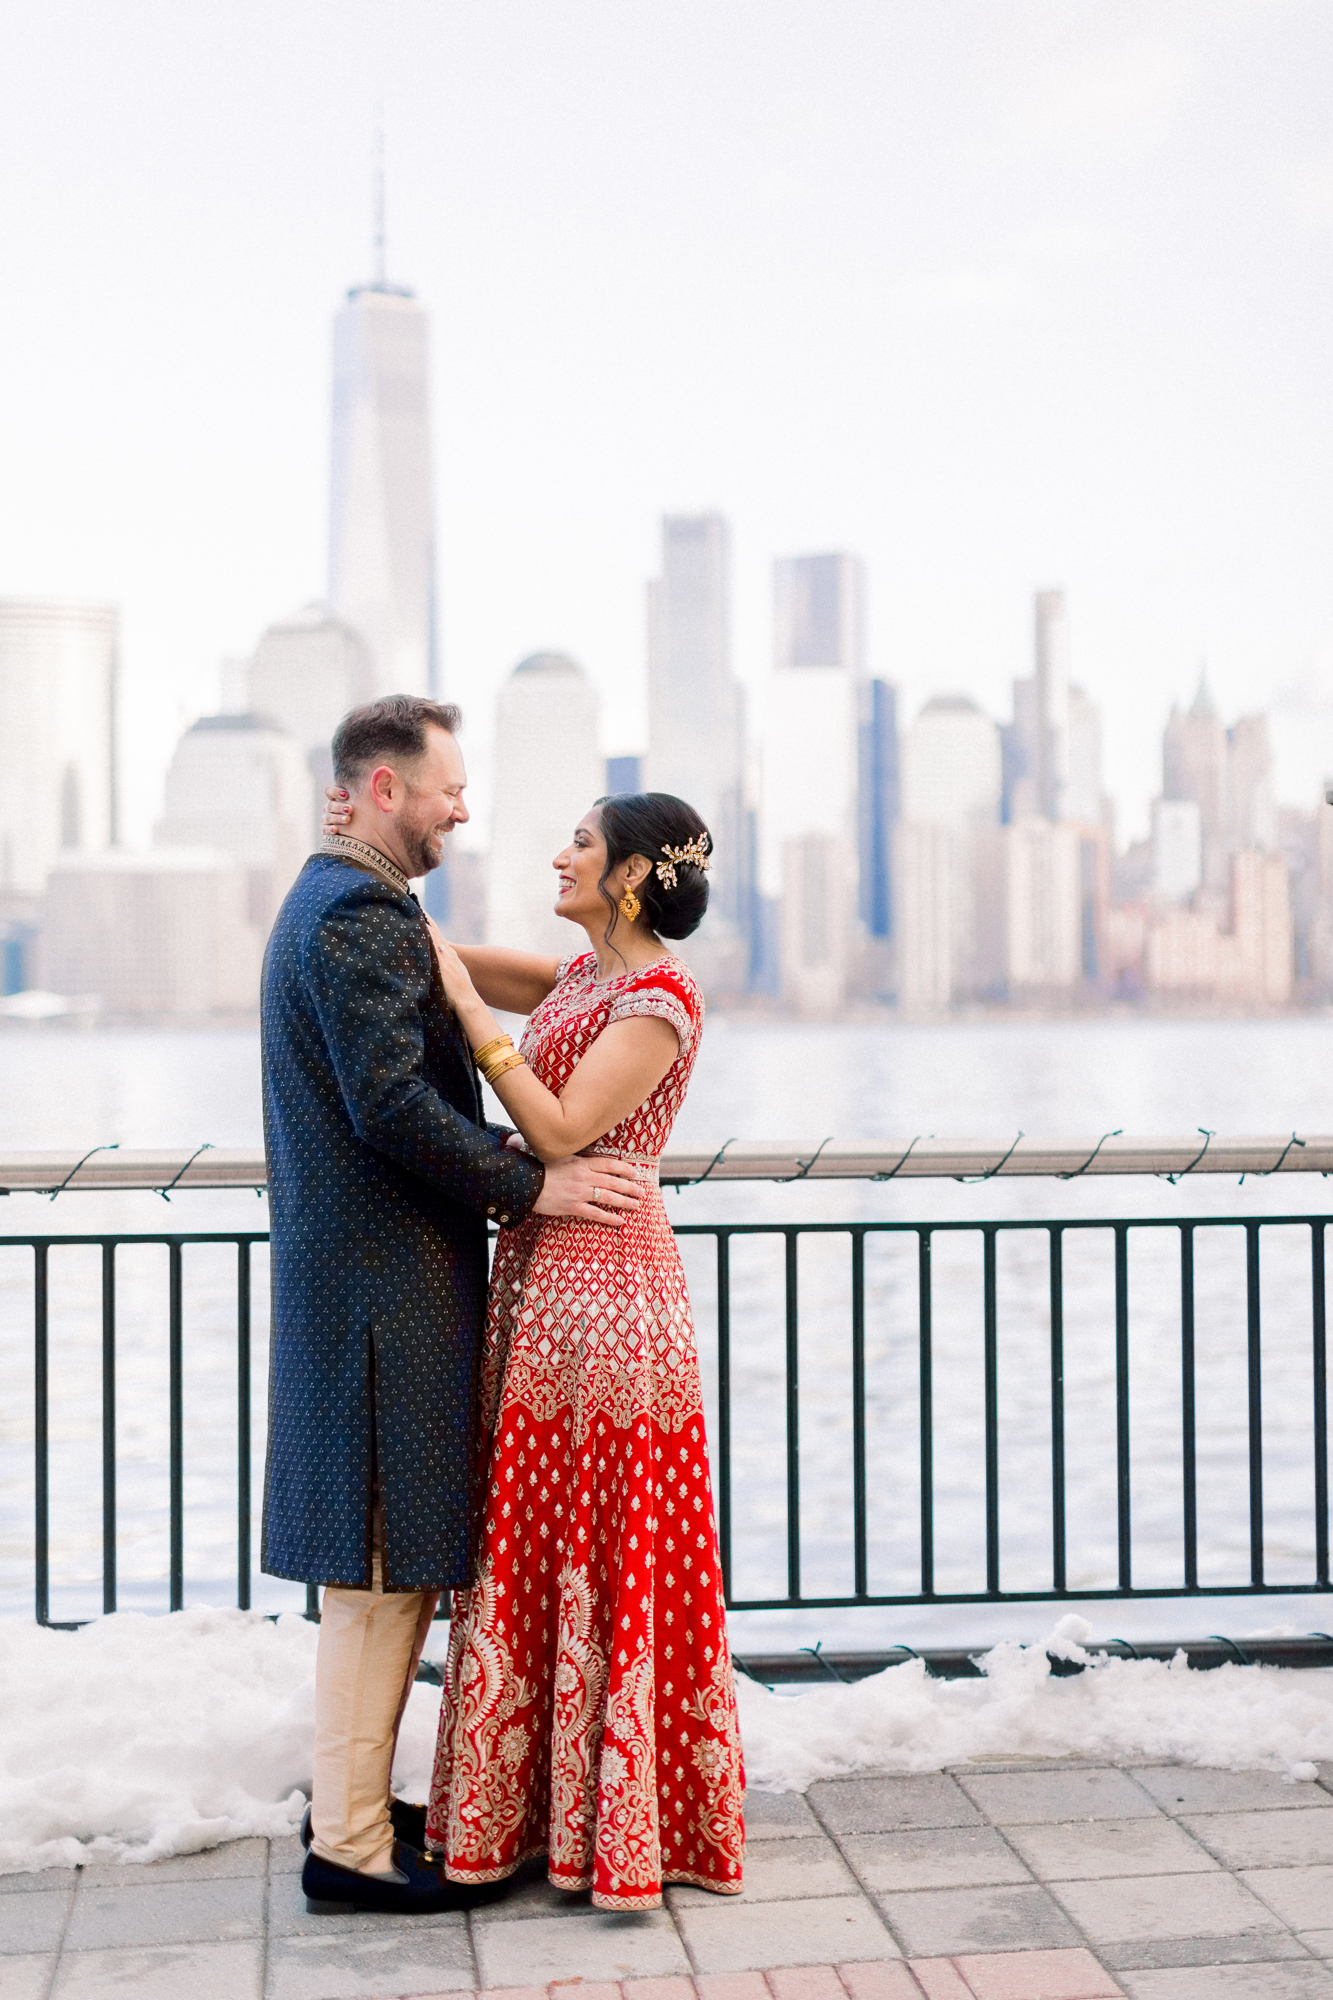 Timeless NJ winter wedding indoors at the Rooftop at Exchange Place